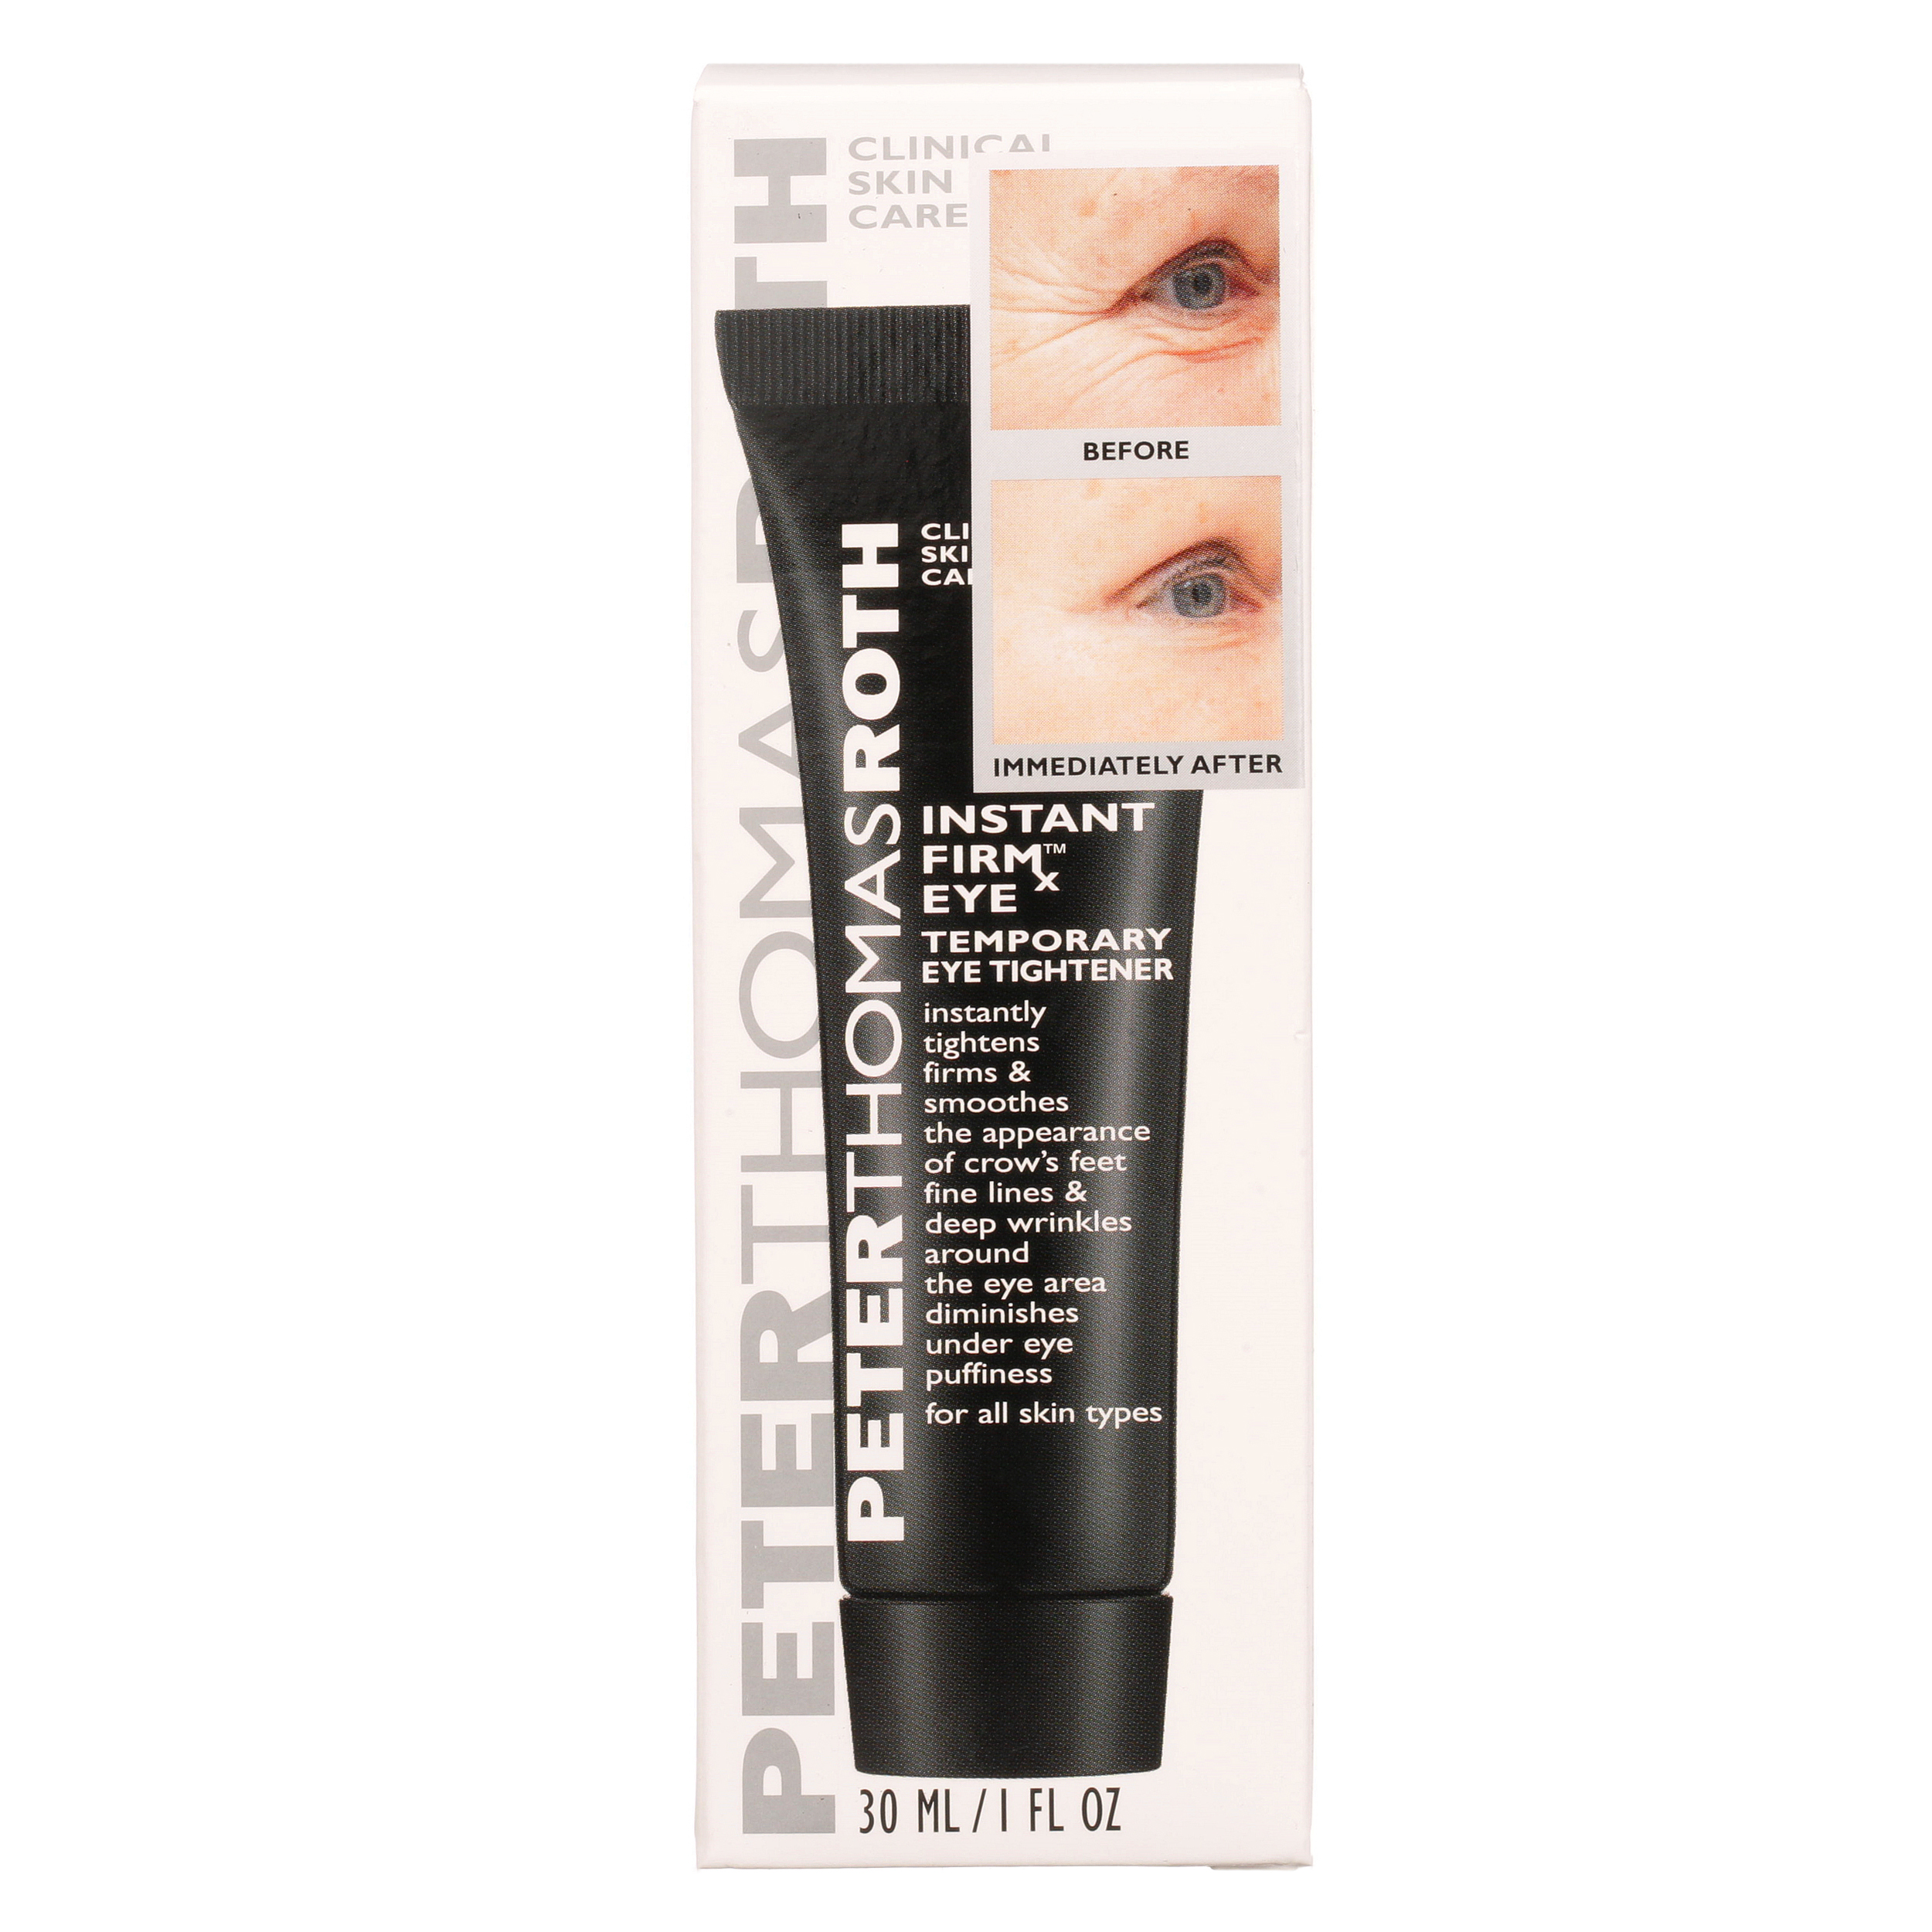 Peter Thomas Roth Instant FIRMx Eye 1 oz - image 4 of 6